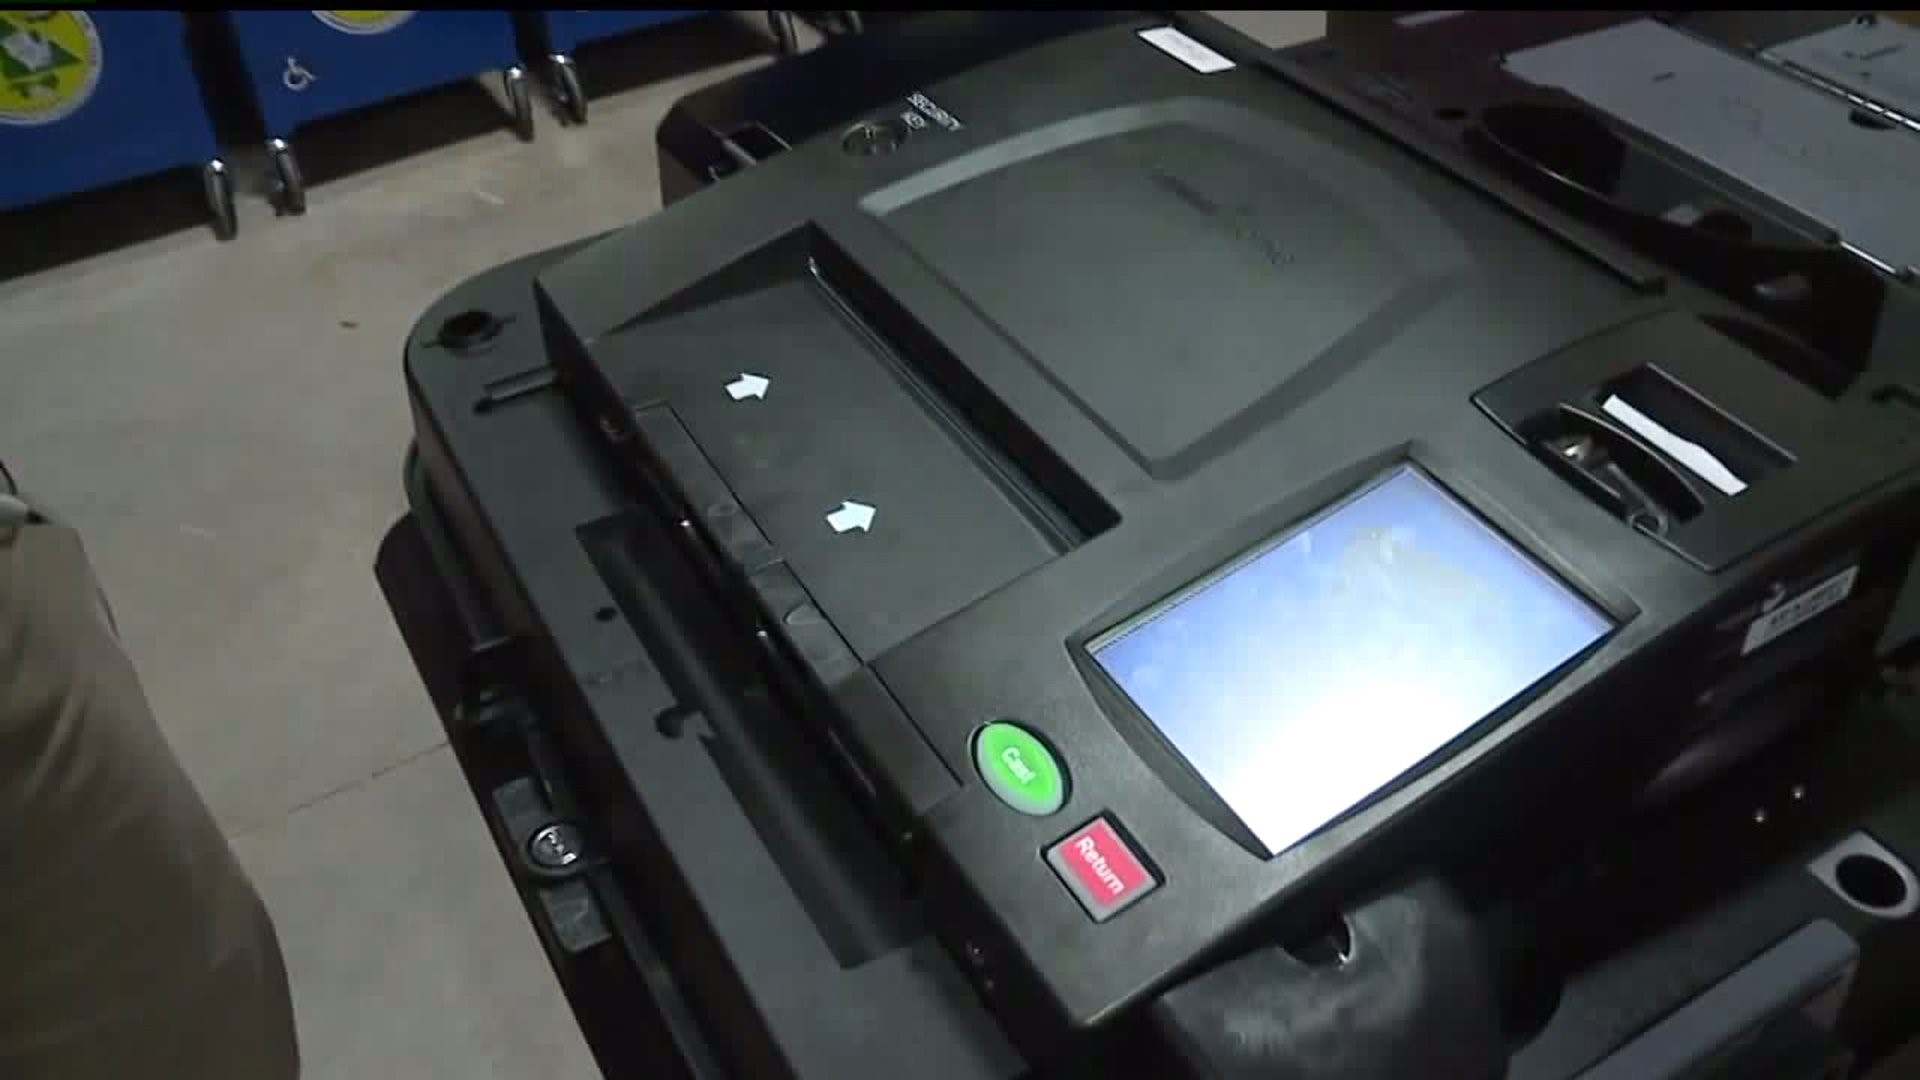 Board of elections addresses voting problems in York County